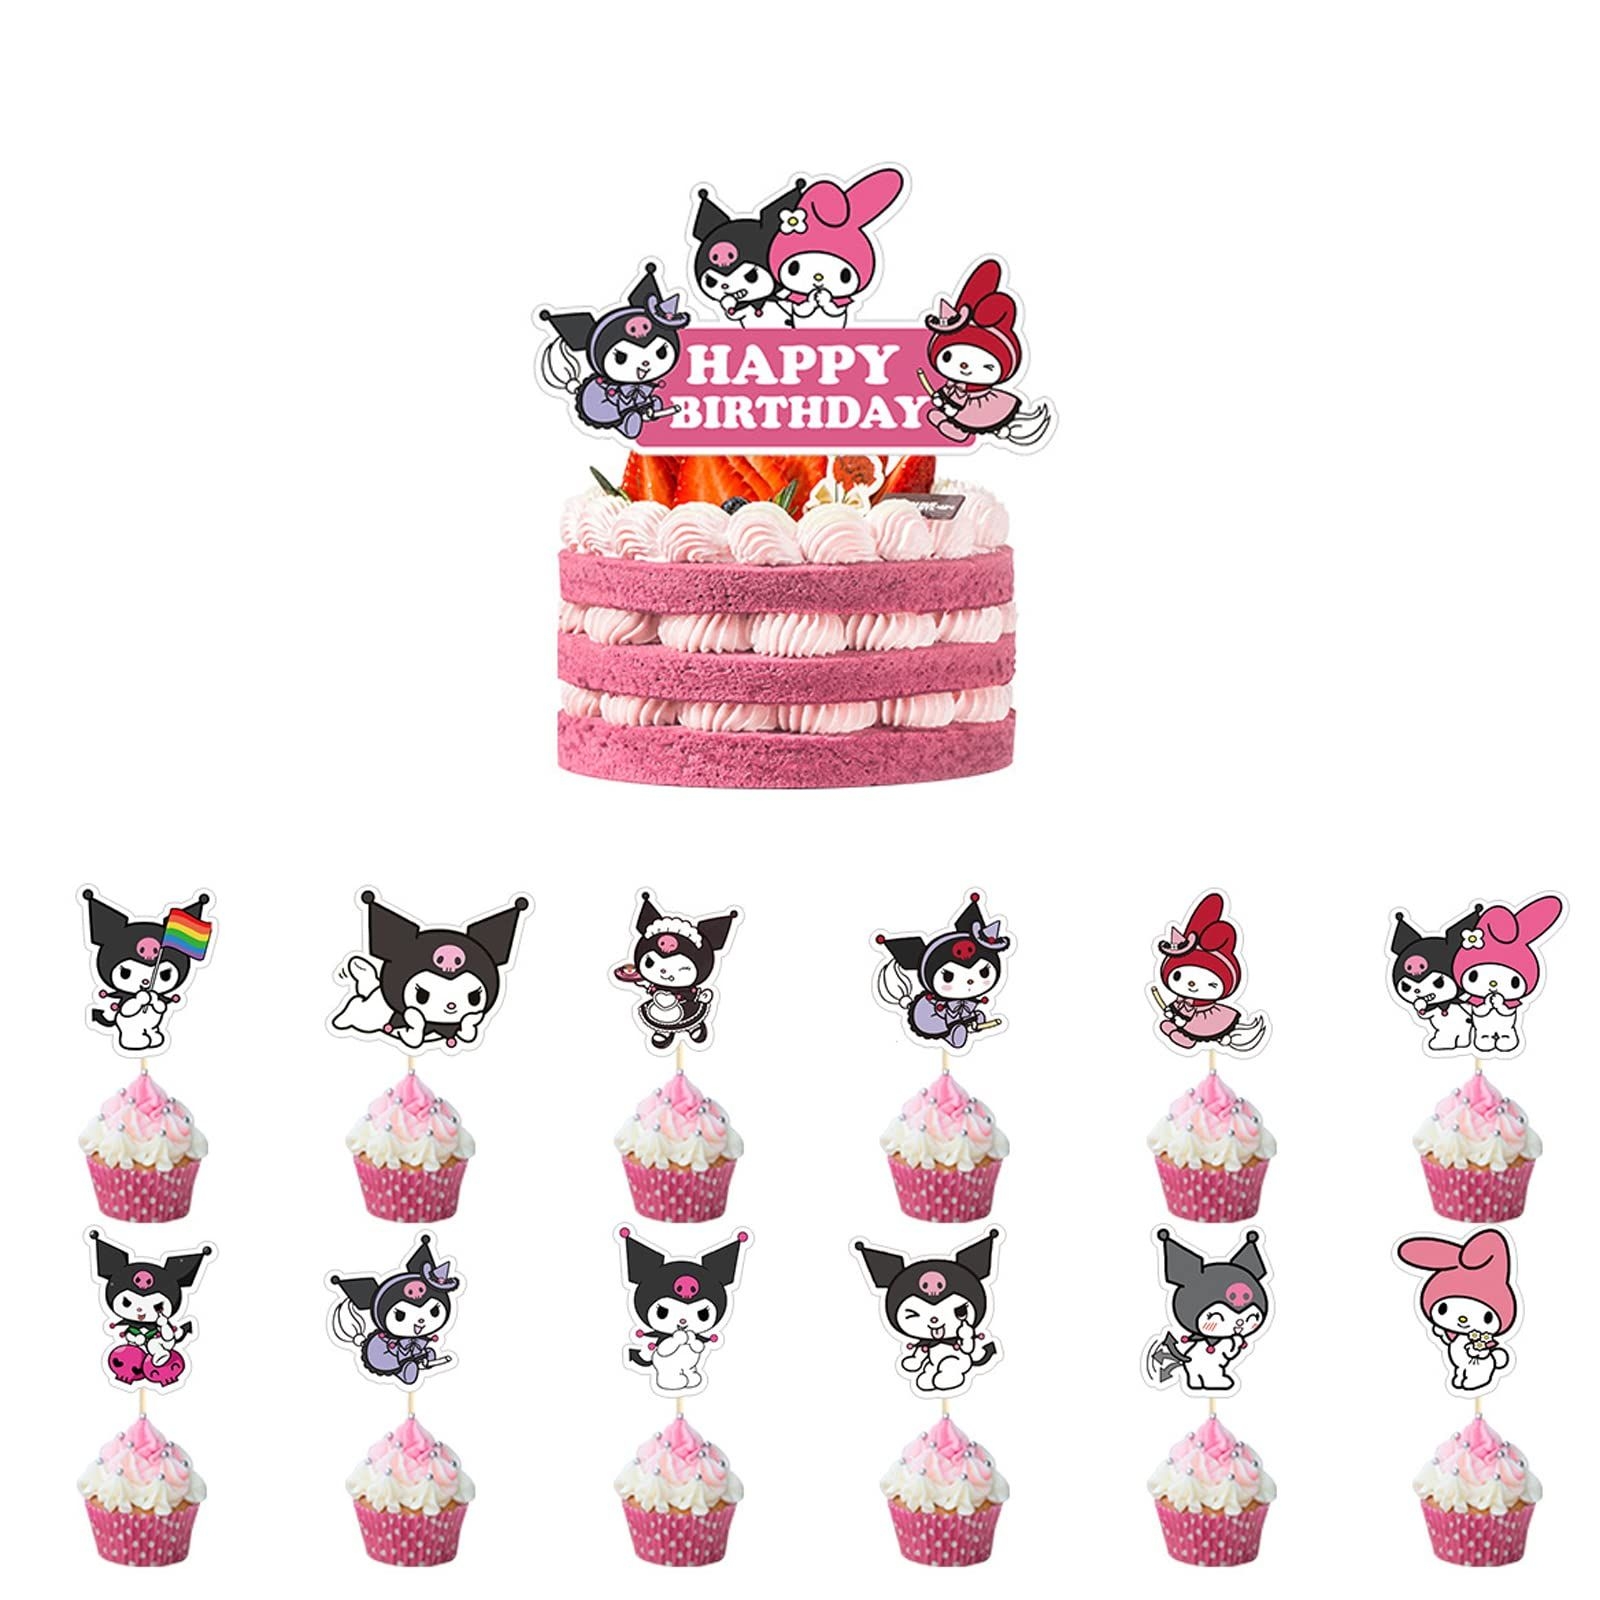 13 Pack Kuromi Decoration Birthday Cake Topper Set Kuromi Party Happy Birthday Cupcake Toppers Birthday Decorations For Children Or Adults Hello Kitty Birthday Party Hello Kitty Party Cat Birthday Party